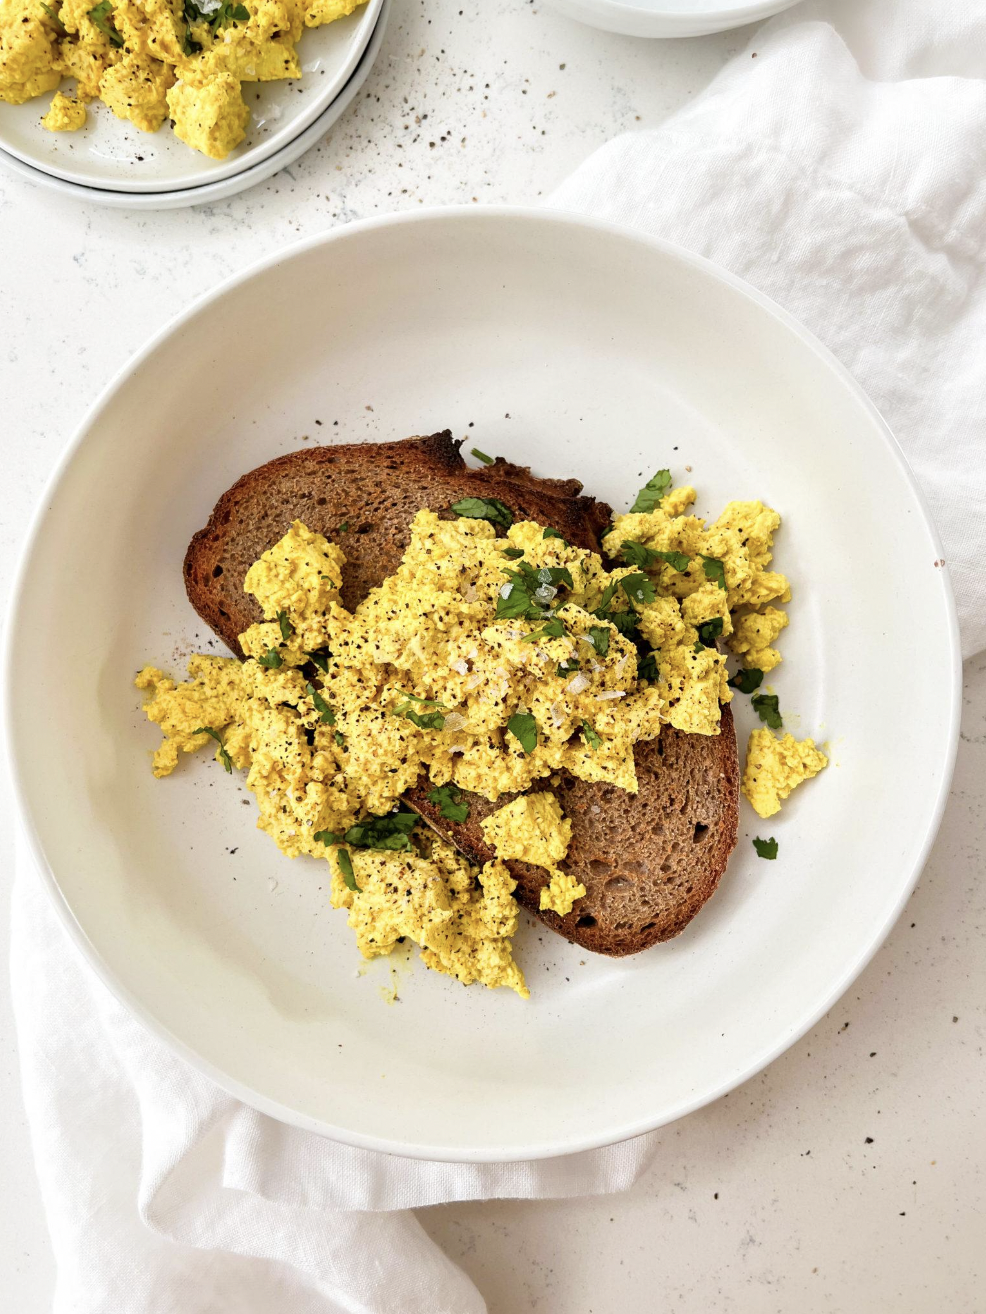 This meal is perfect if you're craving eggs (but don't actually eat eggs). Vegan friends, this is the easy meal for you. (via <a href="https://munchingwithmariyah.com/the-best-tofu-scramble/"><strong>Munching With Mariyah</strong></a>)